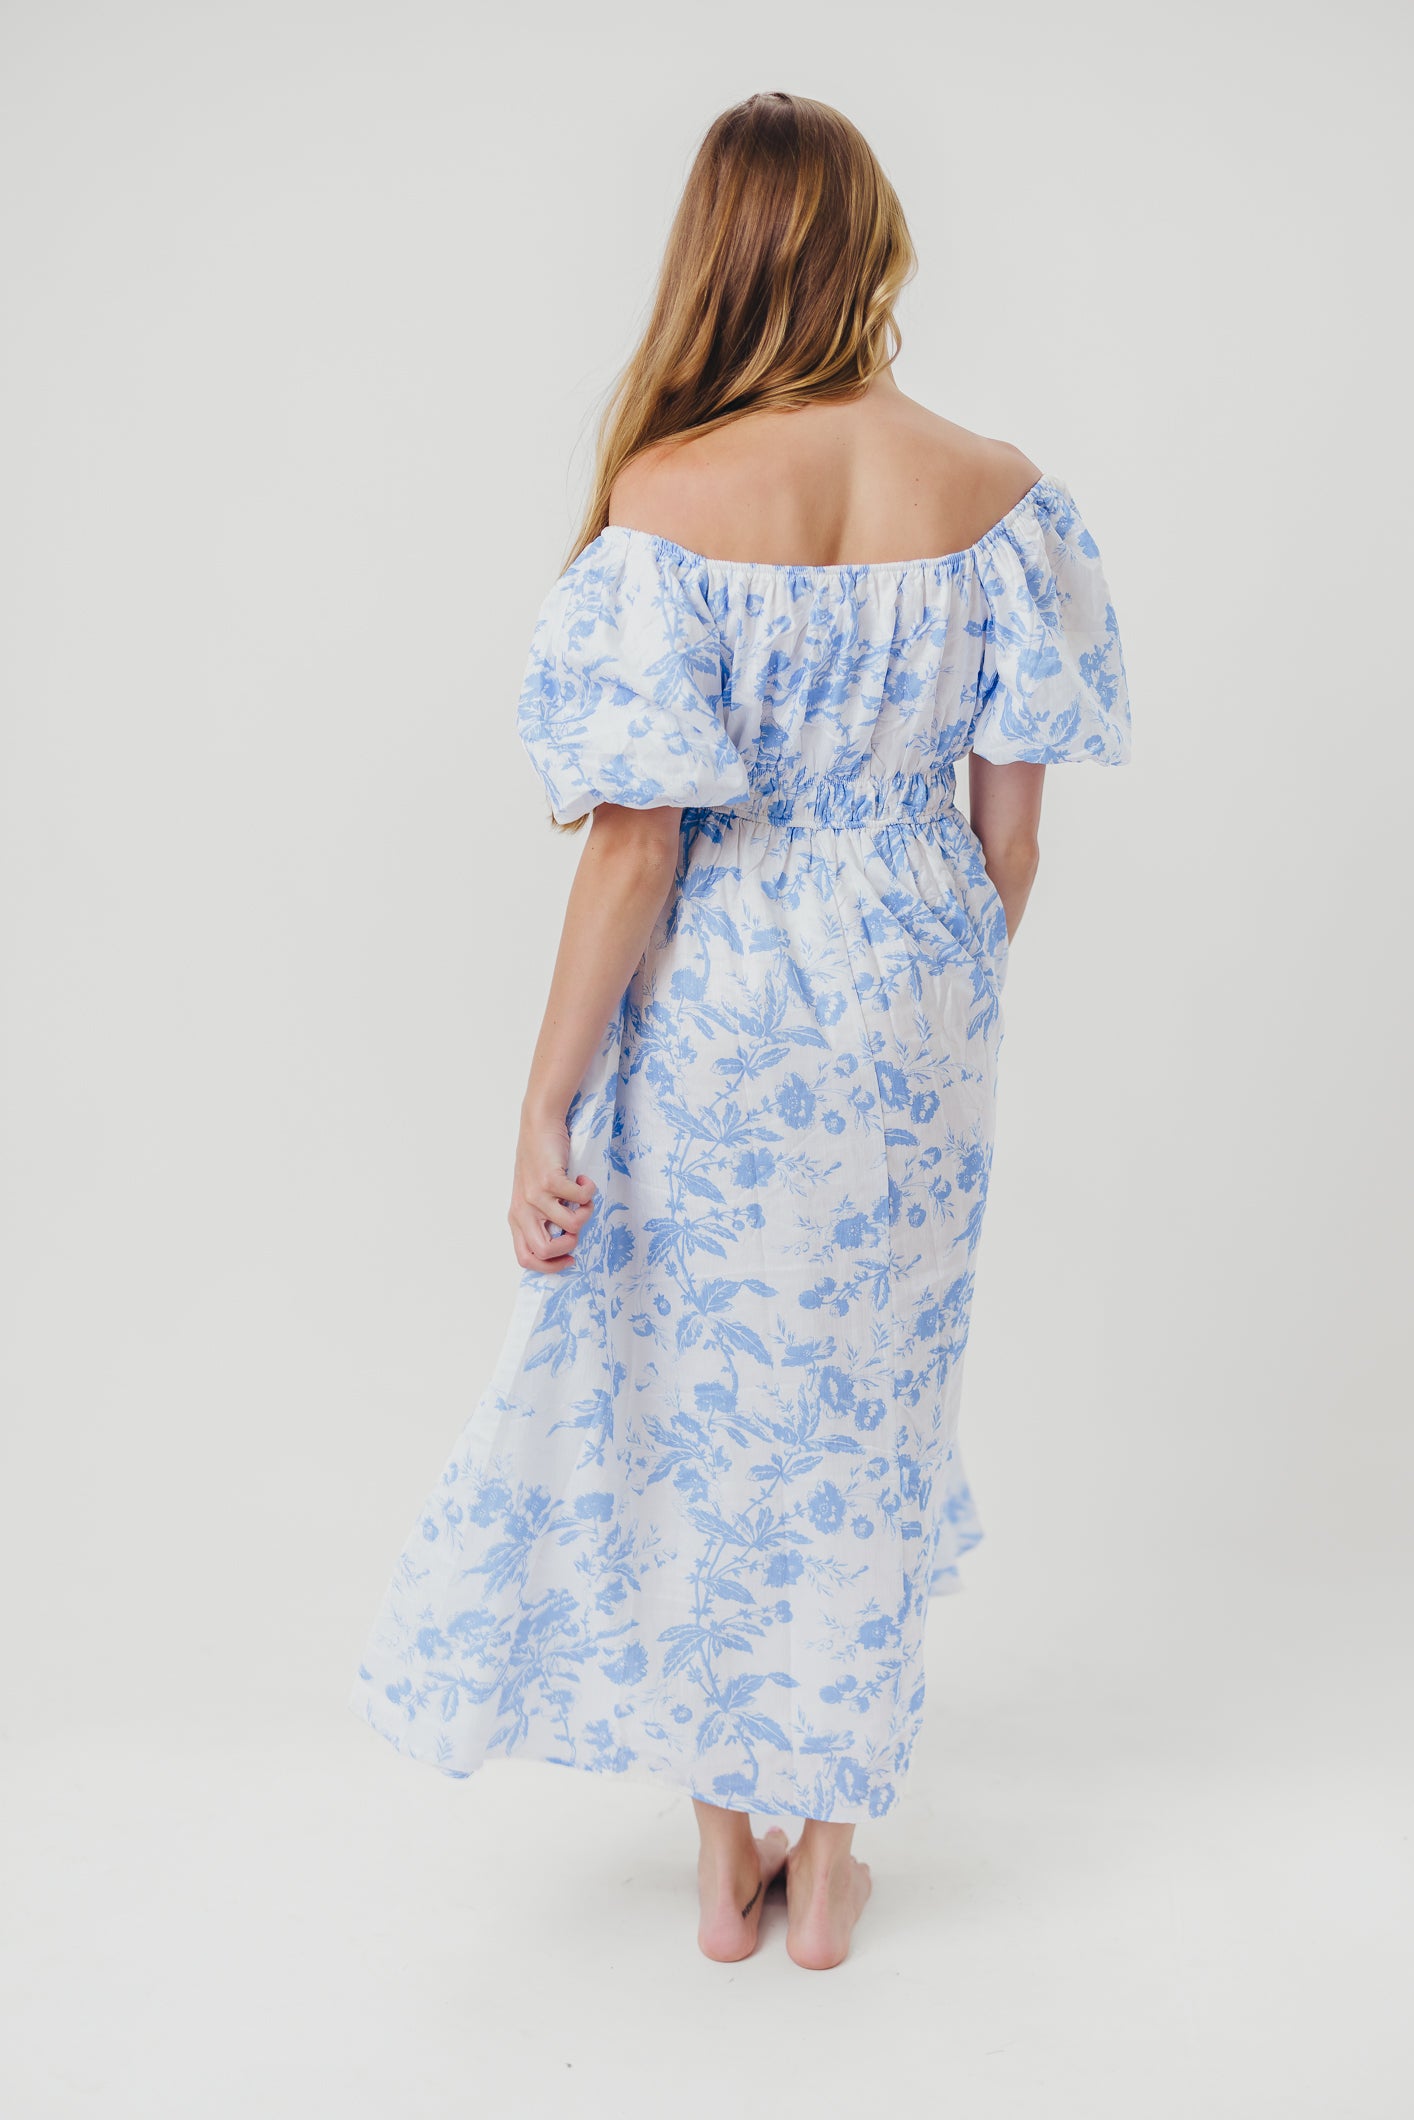 Mallory Textured Print Midi Dress in Blue Floral